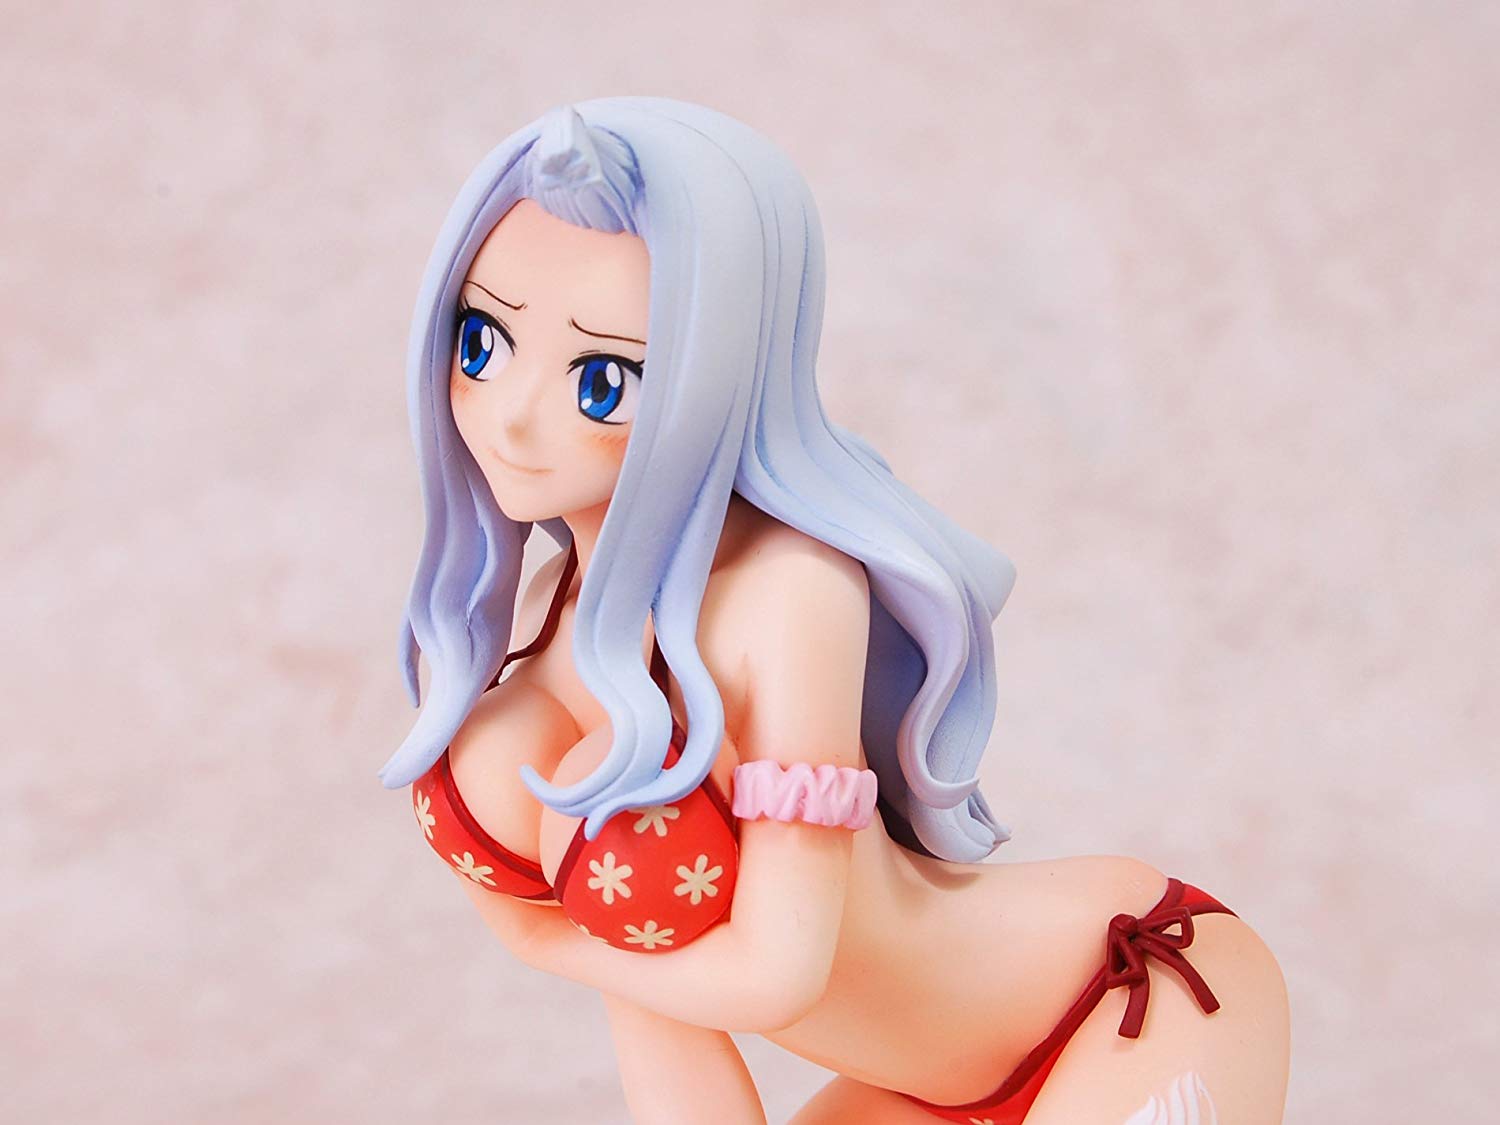 60+ Hot Pictures Of Mirajane Strauss from Fairy Tail Which Are Sure to Catch Your Attention | Best Of Comic Books